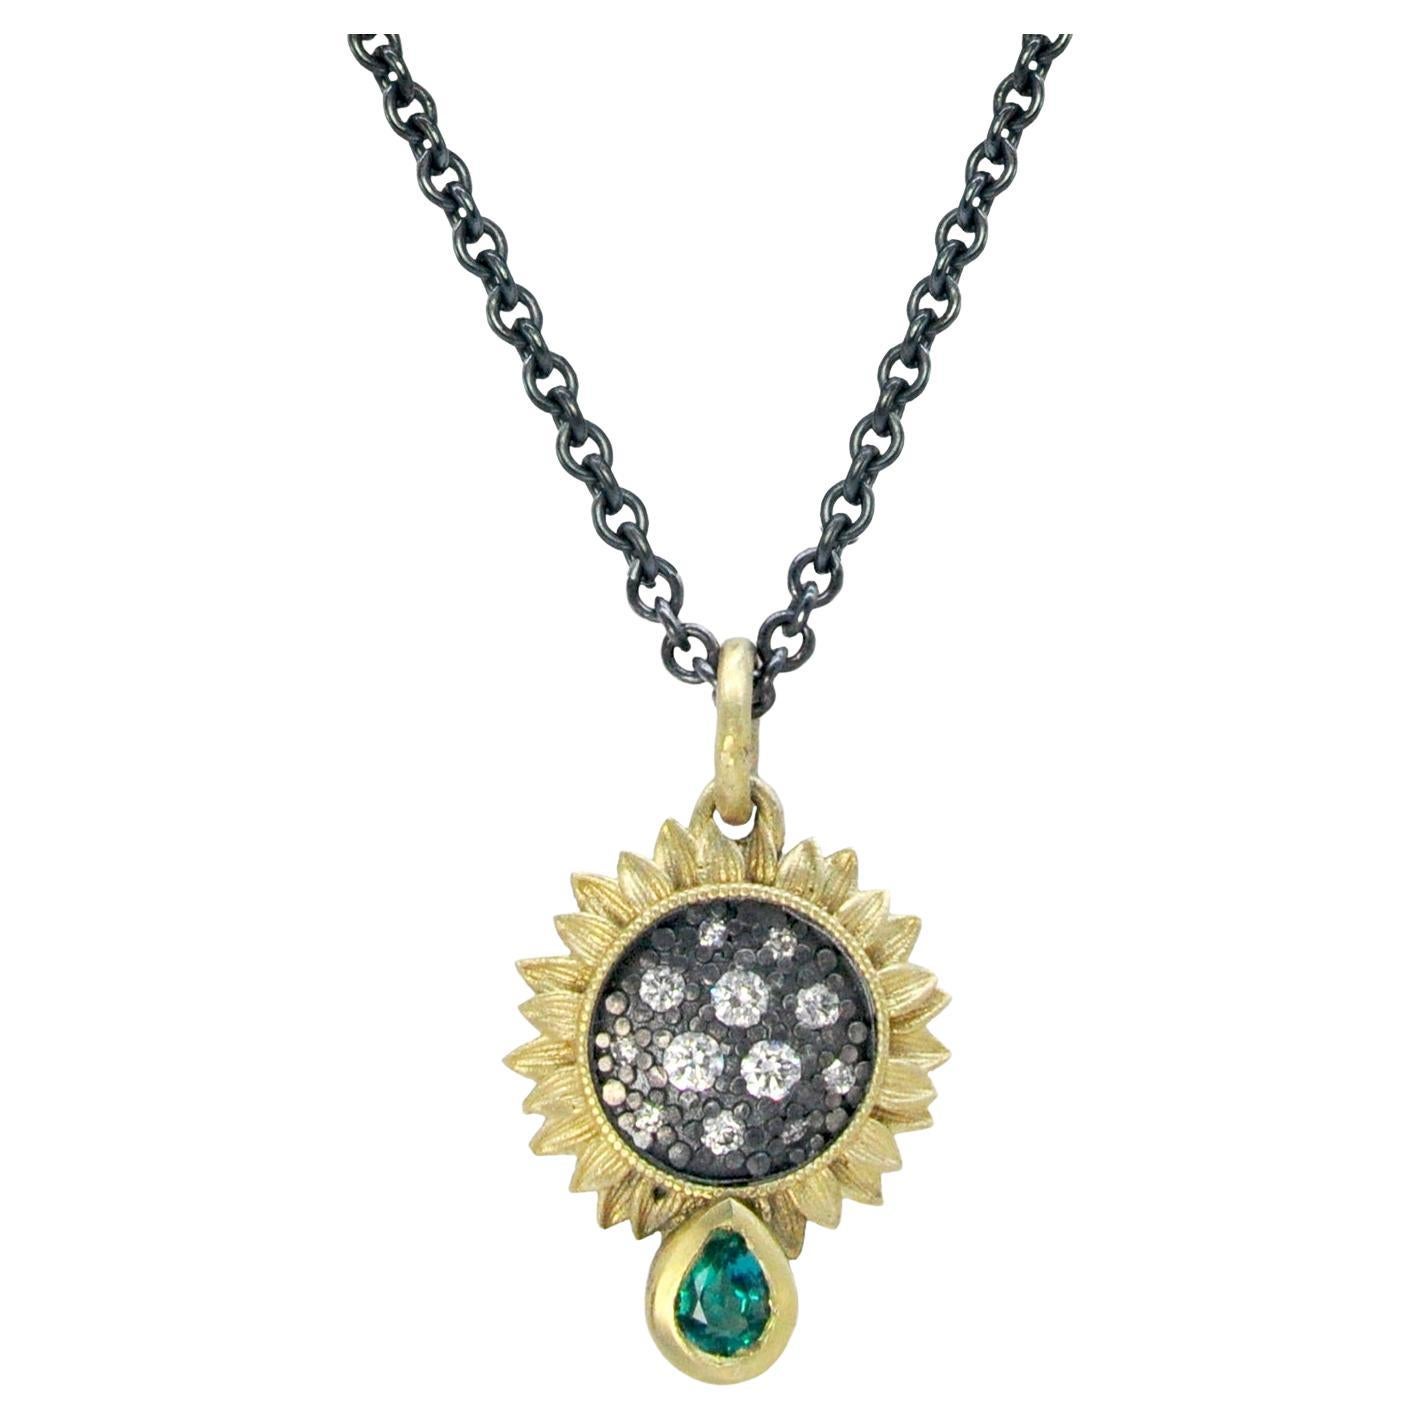 Sunflower Necklace with Pave Set Diamonds in Oxidized Silver with Emerald, Small